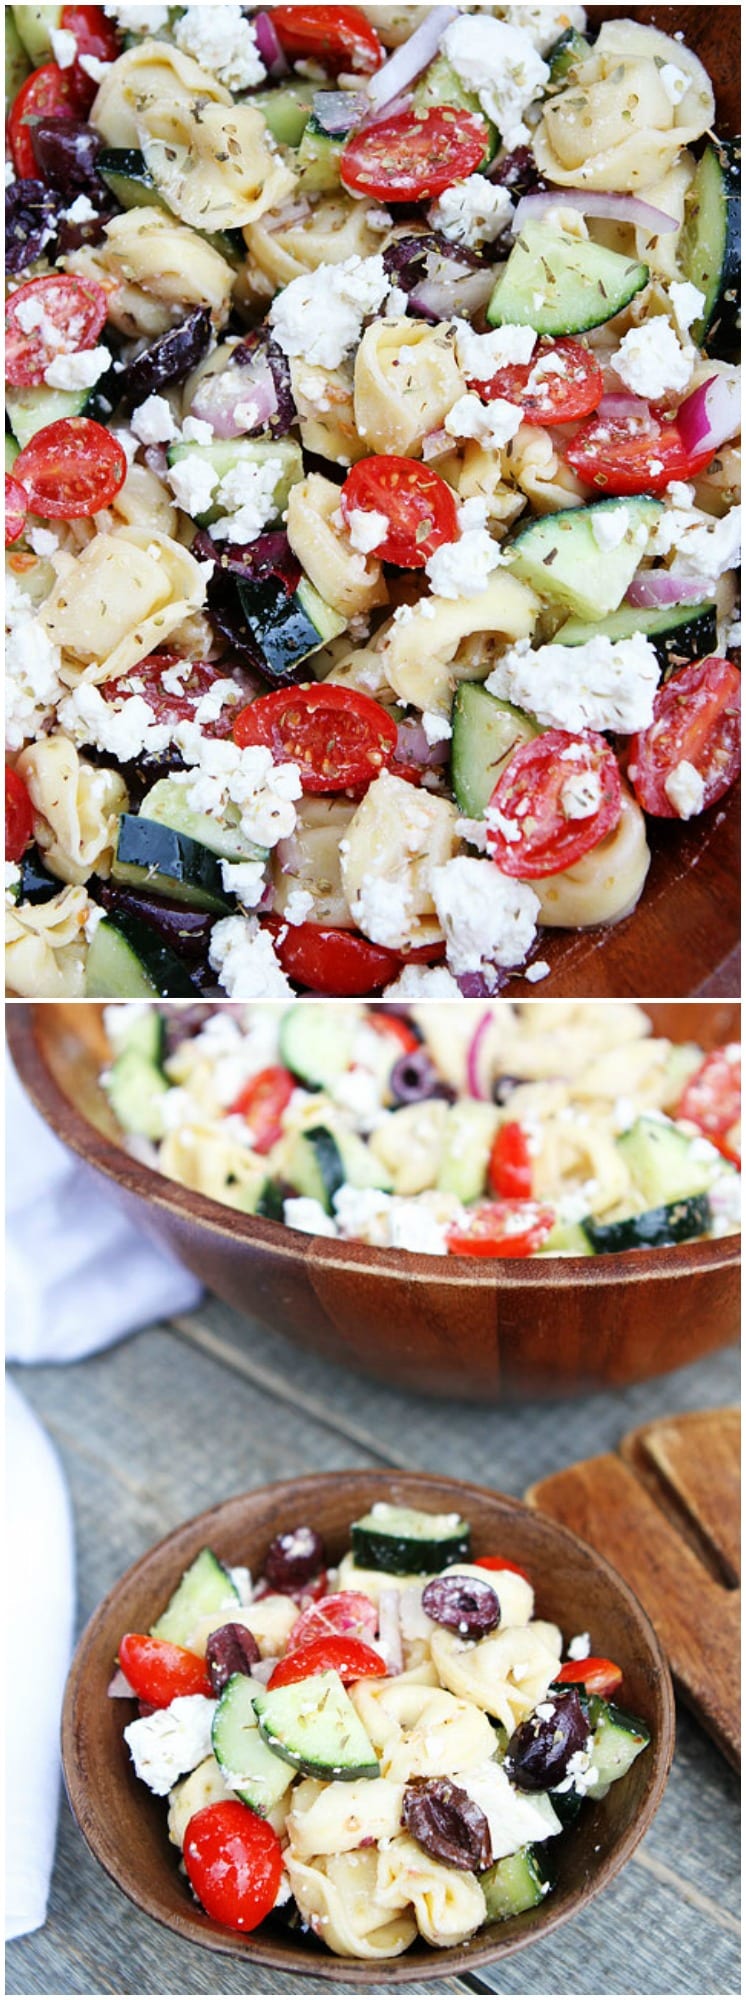 Greek Tortellini Salad Recipe on twopeasandtheirpod.com This salad is always a hit at potlucks! It is a family favorite!